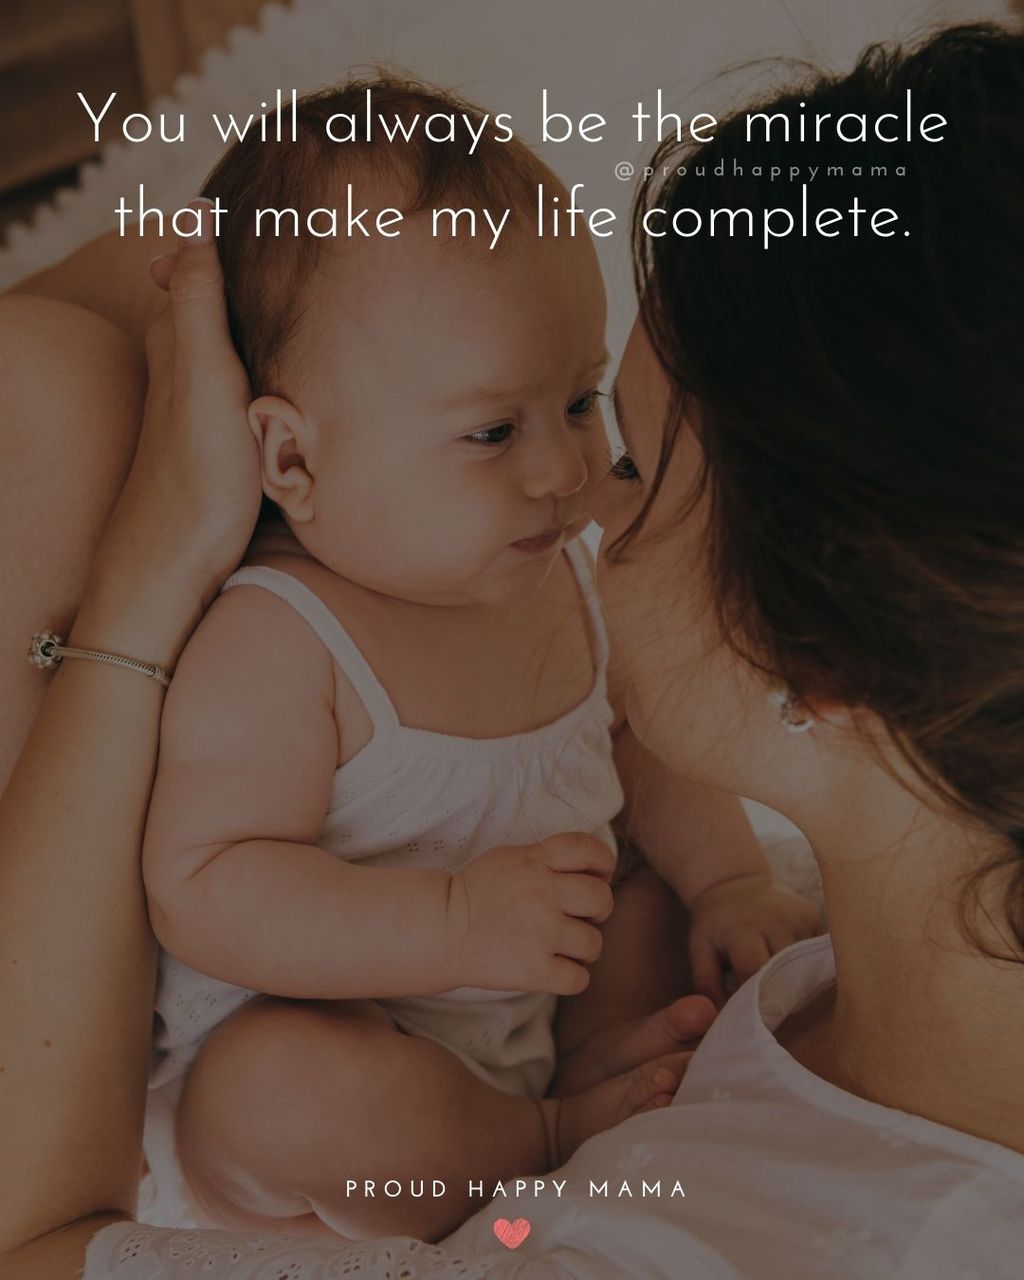 Baby Girl Quotes - You will always be the miracle that make my life complete.